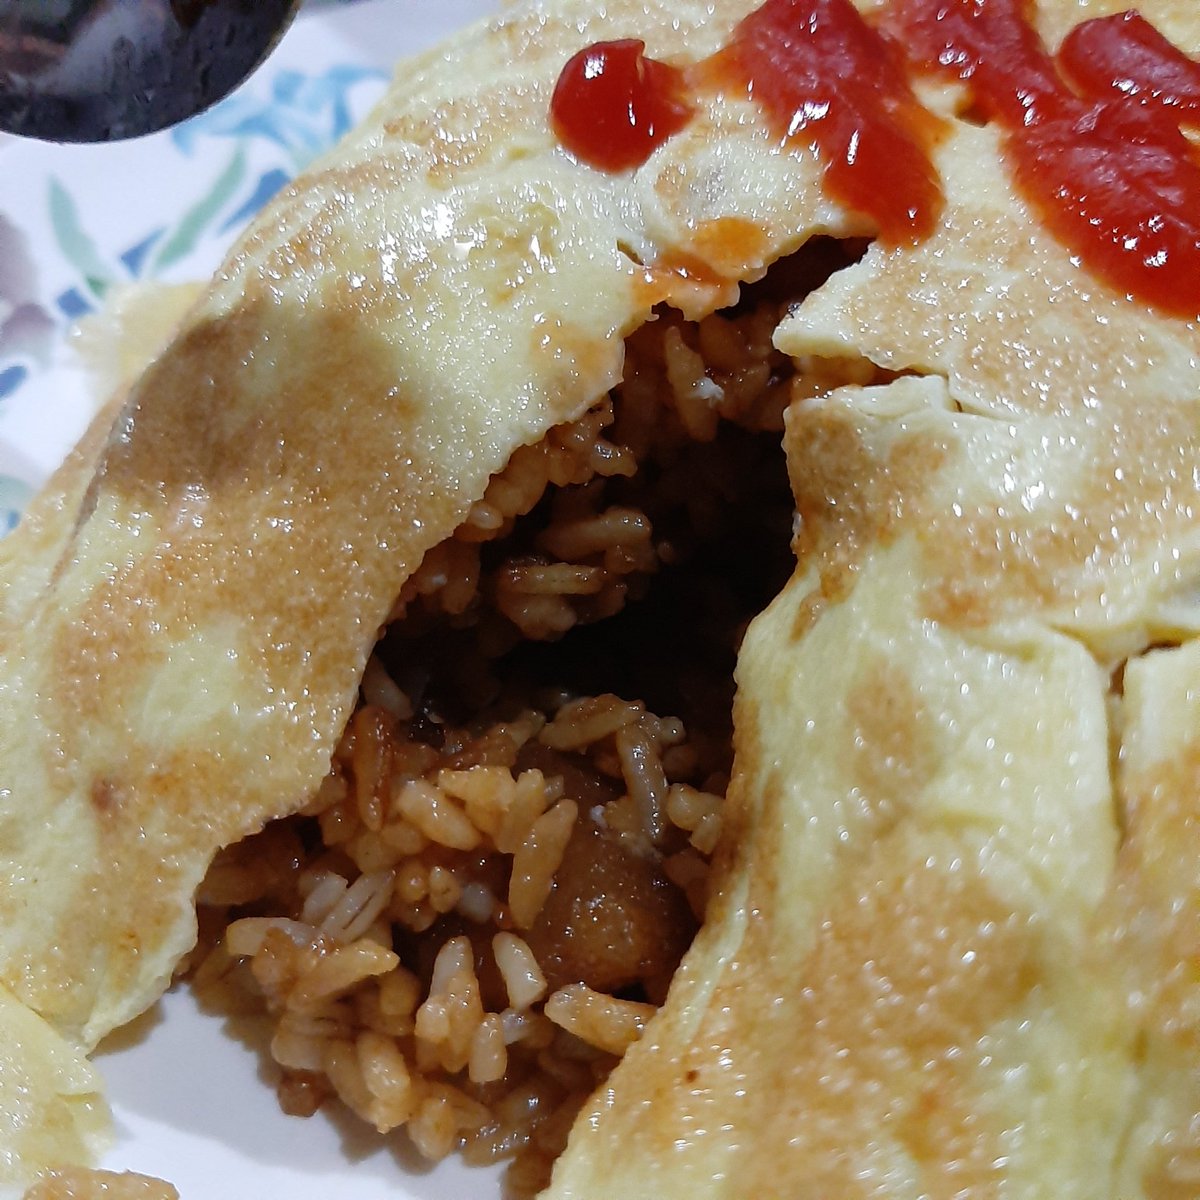 DAY #16 ㅡ 09/05 04:03 AMI MADE OMURICE WITH NU'EST LOGO ON IT I HAVE MY PREDAWN MEAL WHILE CELEBRATING NU'ESTS COMEBACK #뉴이스트_JR_아론_백호_민현_렌  #NUEST  #NUEST_The_Nocturne